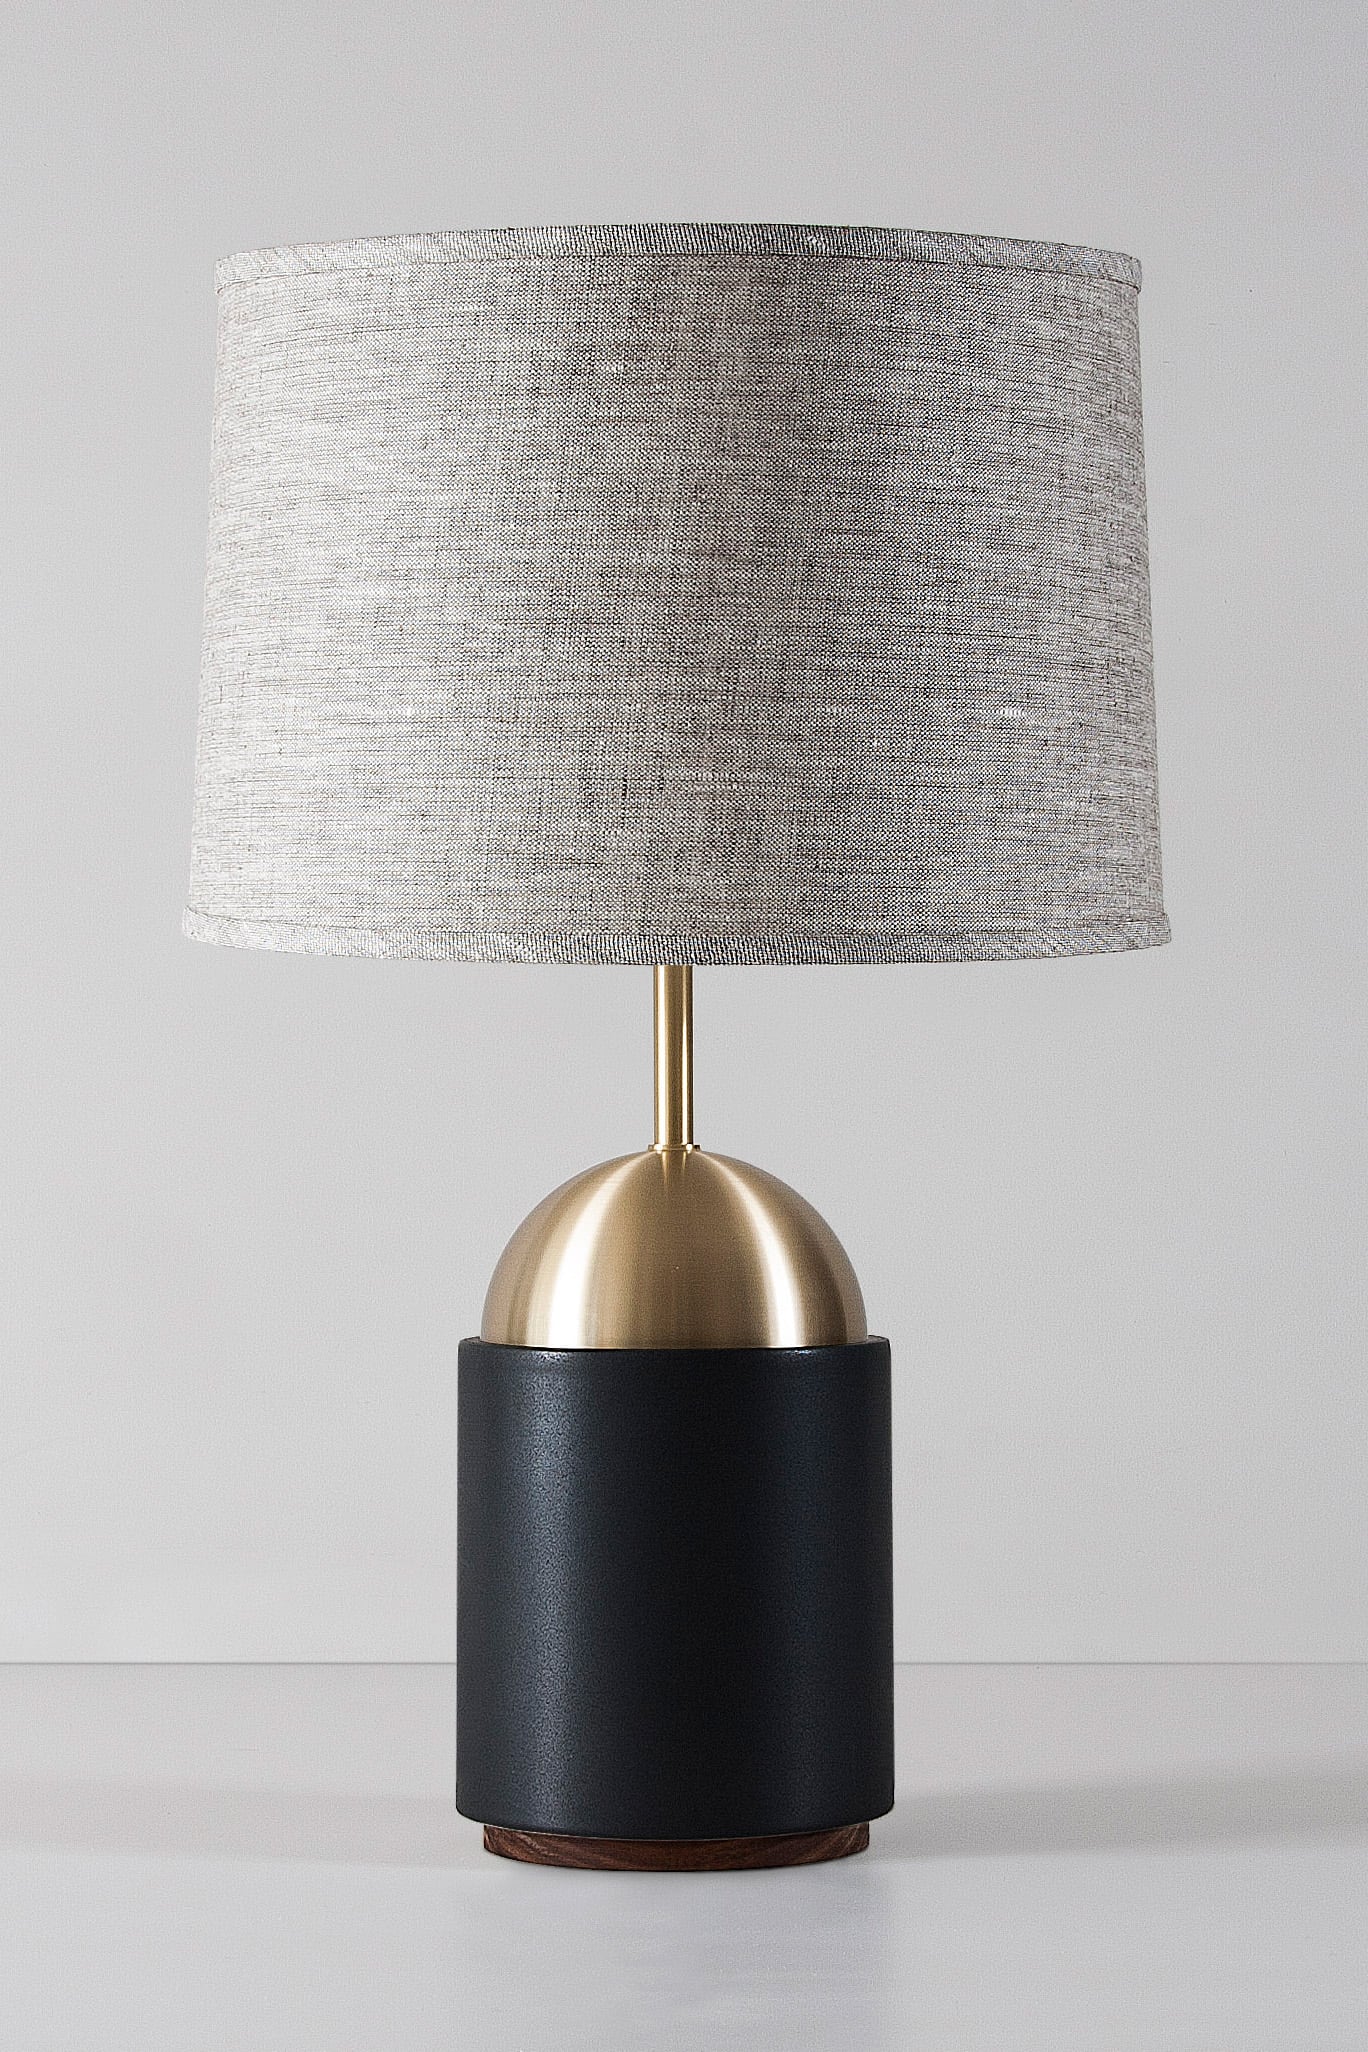 Stone and Sawyer Obsidian Noor Lamp